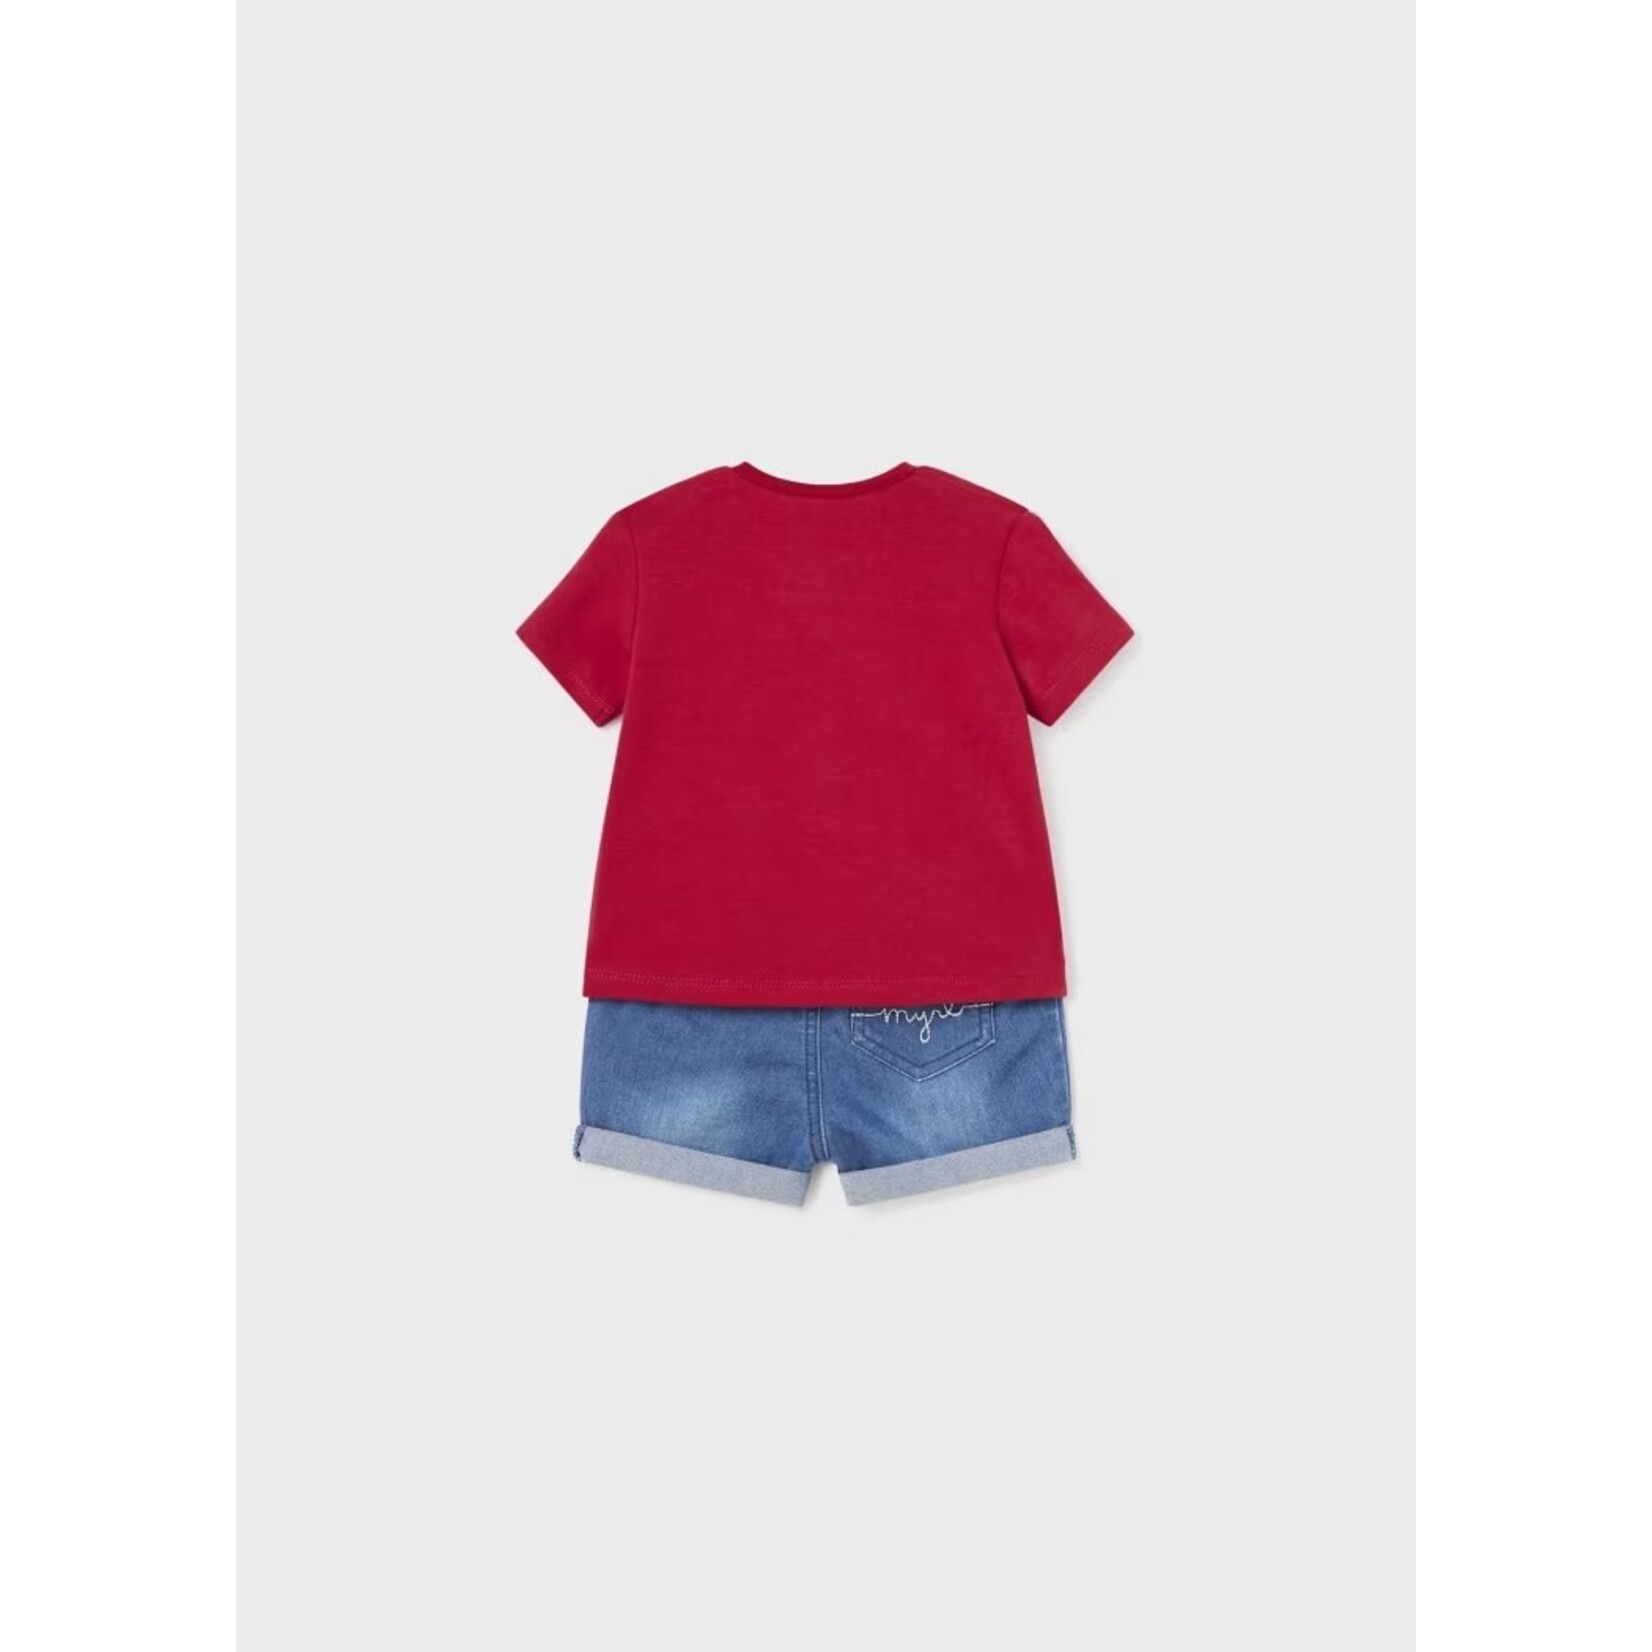 Mayoral MAYORAL - Two-Piece Set - Red T-Shirt with Sea Bird Print and Soft Denim Shorts